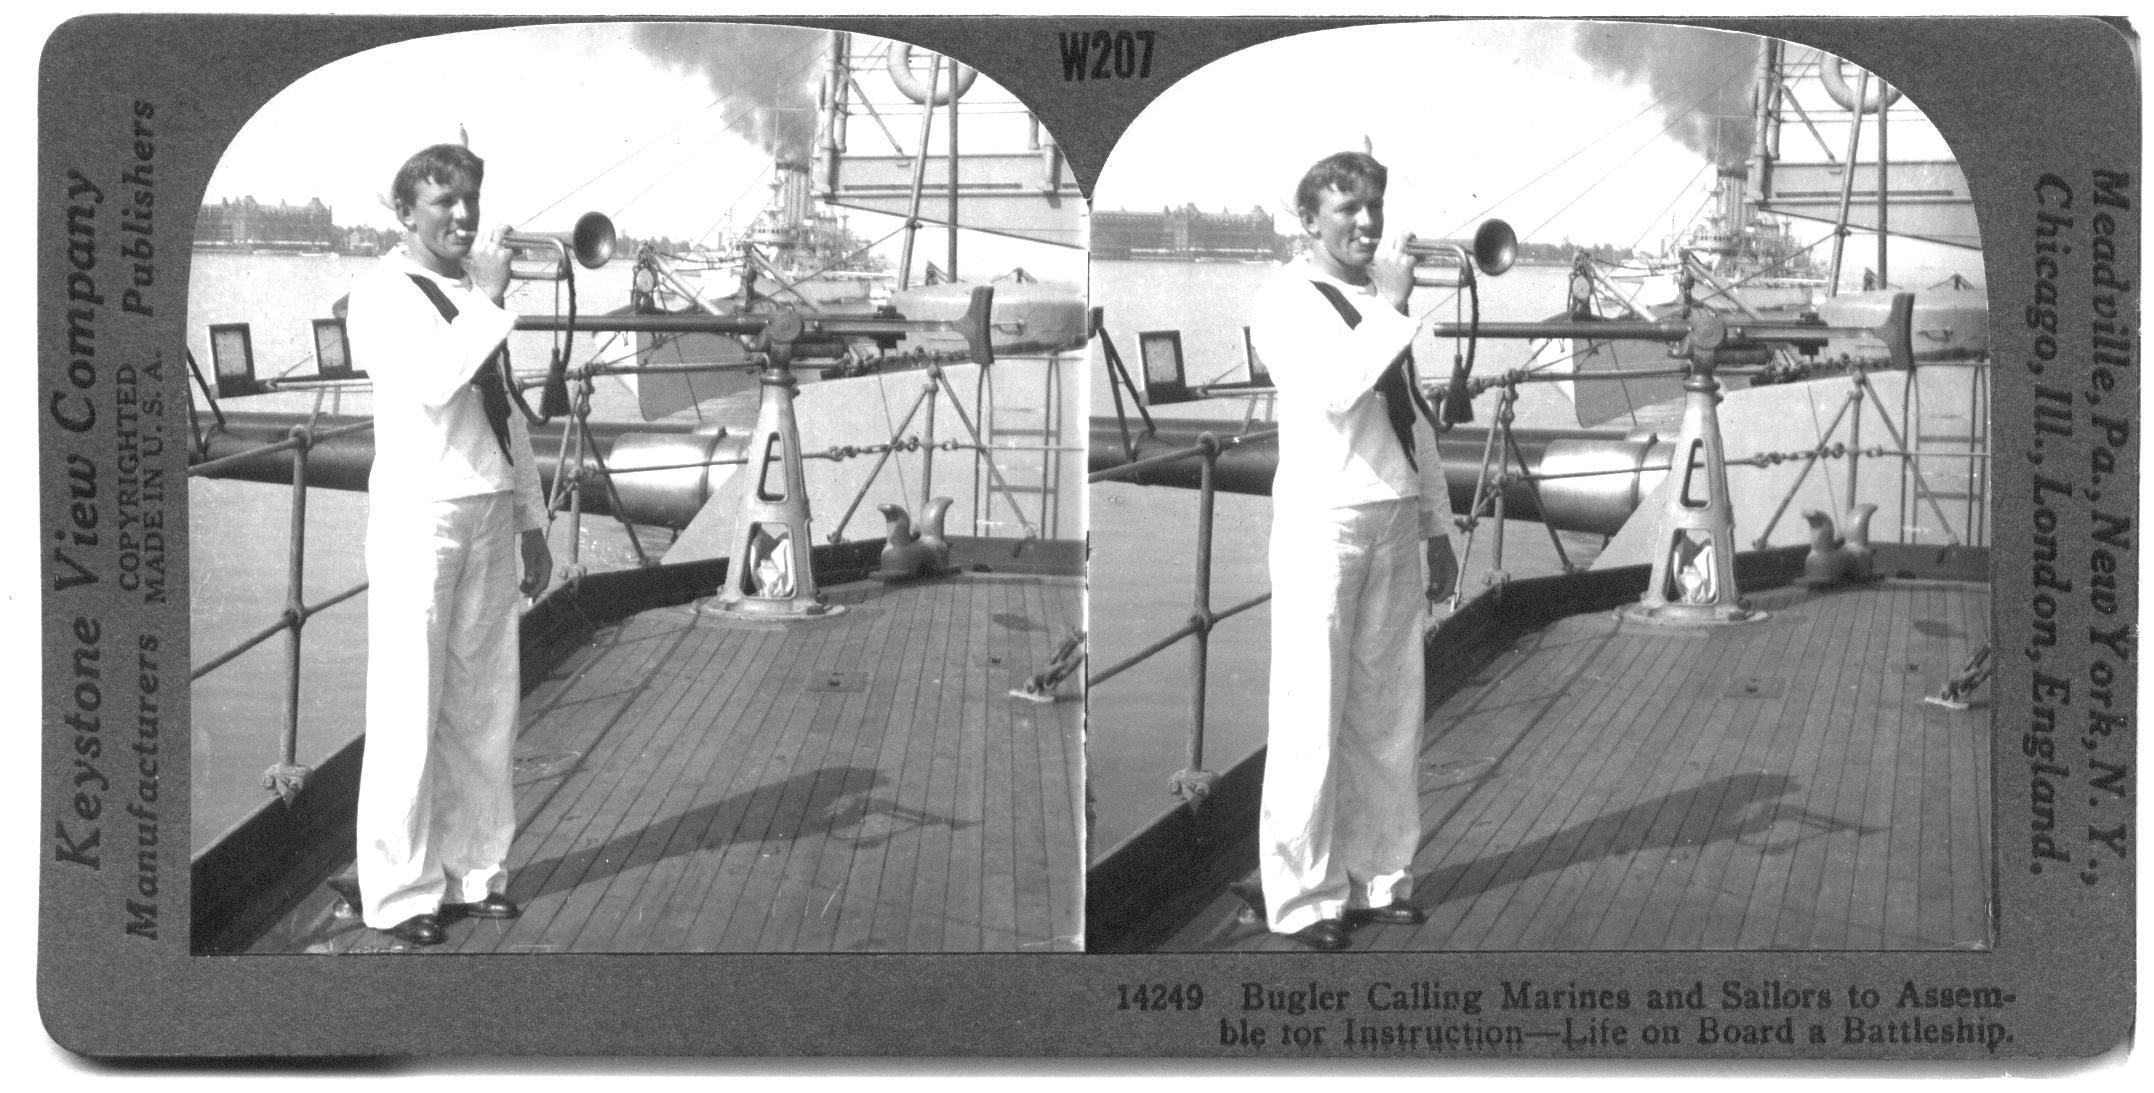 Bugler Calling Marines and Sailors to Assemble for Instruction Life on Board a Battleship